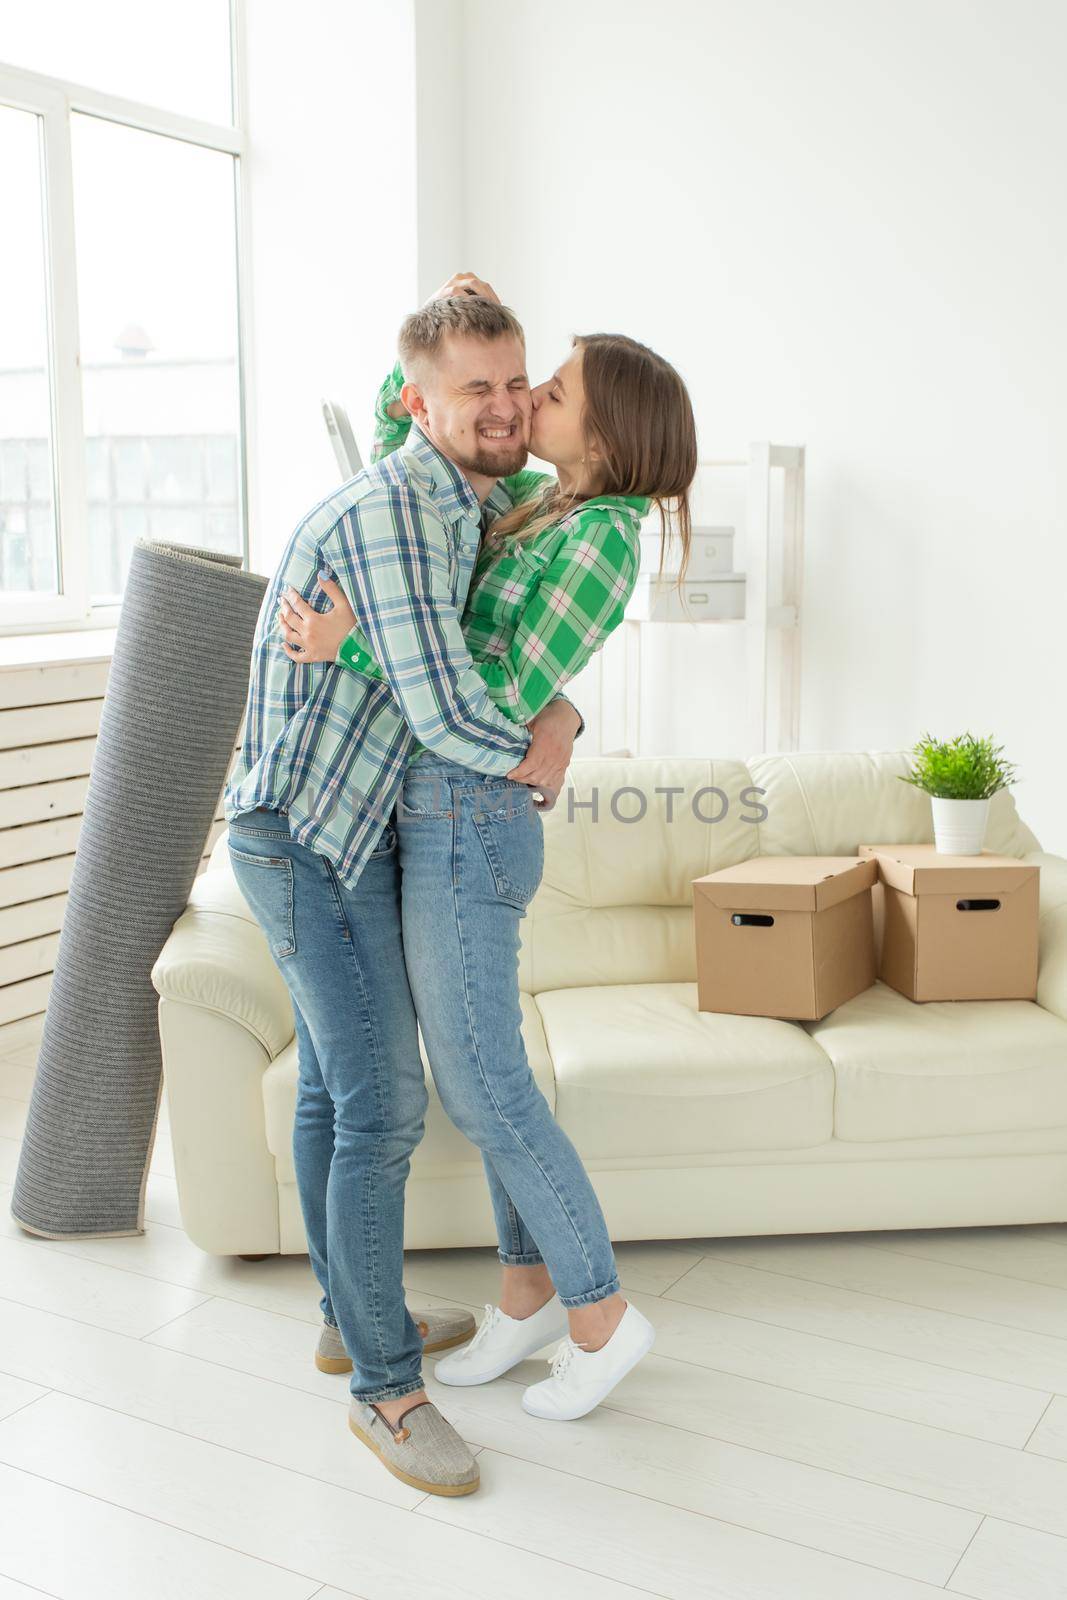 Loving young couple embracing rejoicing in moving to their new home. The concept of moving and housewarming of young family. by Satura86